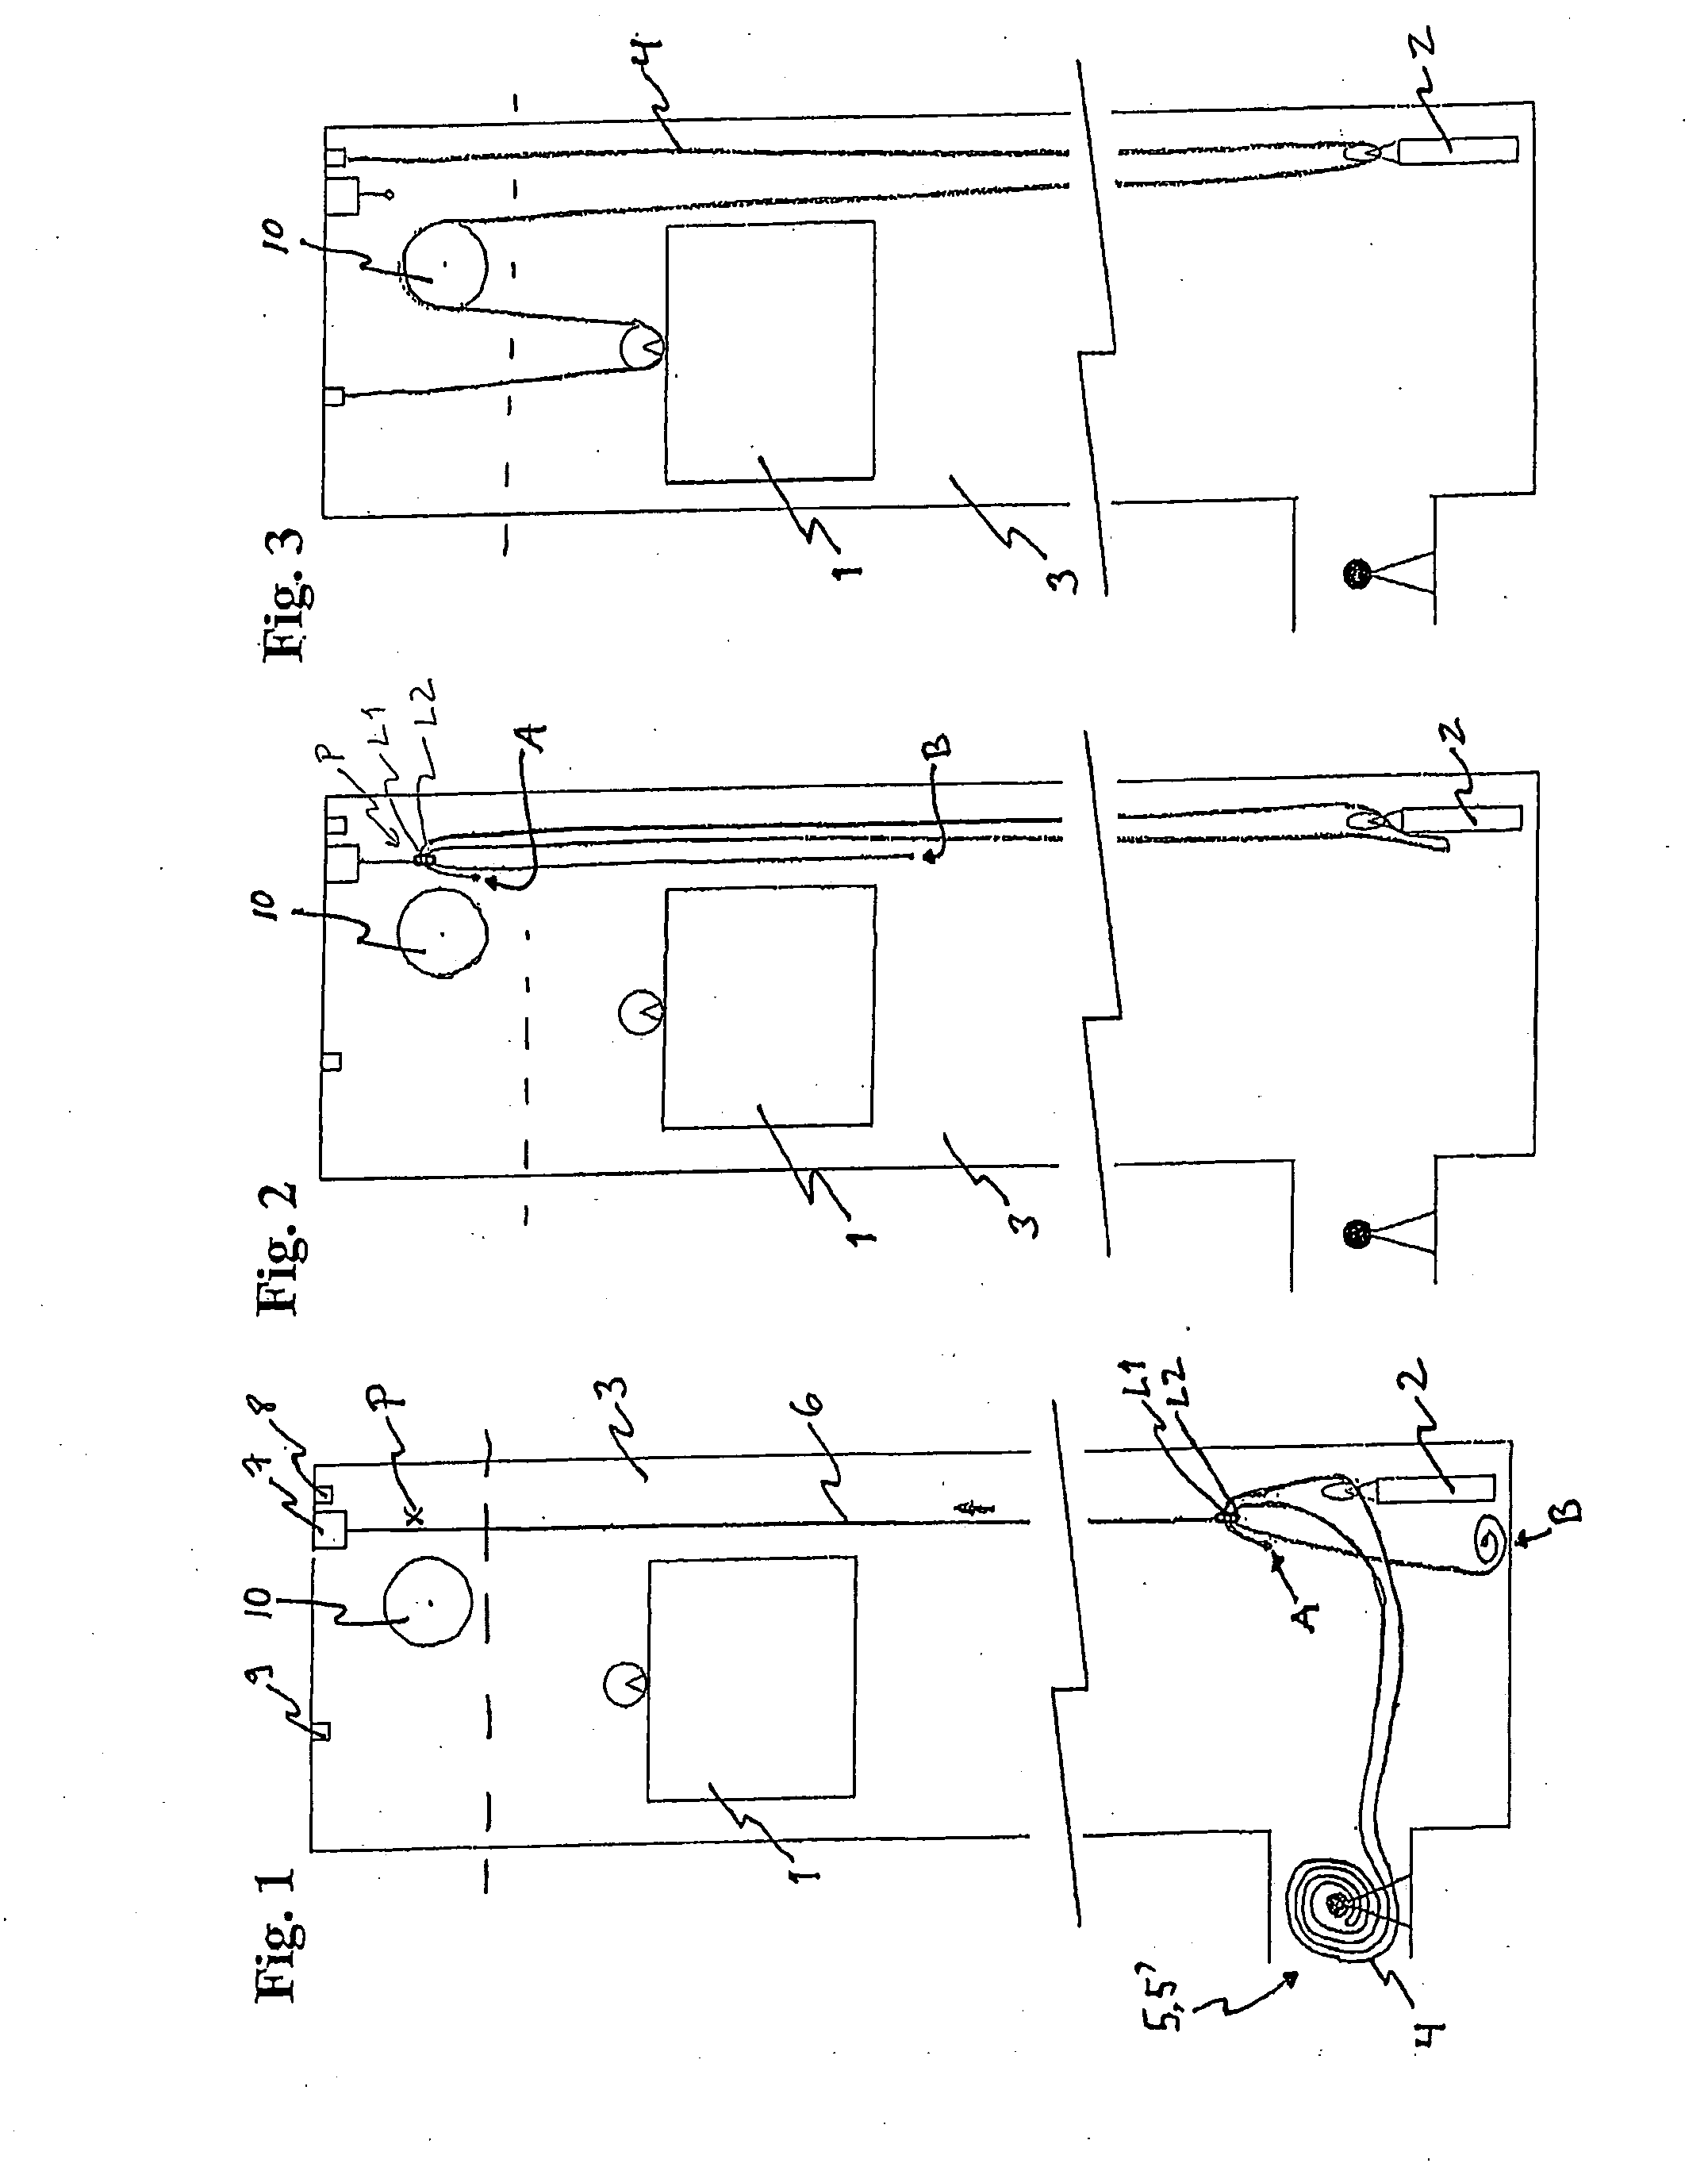 Method for reeving an elevator, rope reel and method for installing an overspeed governor rope or a trailing cable